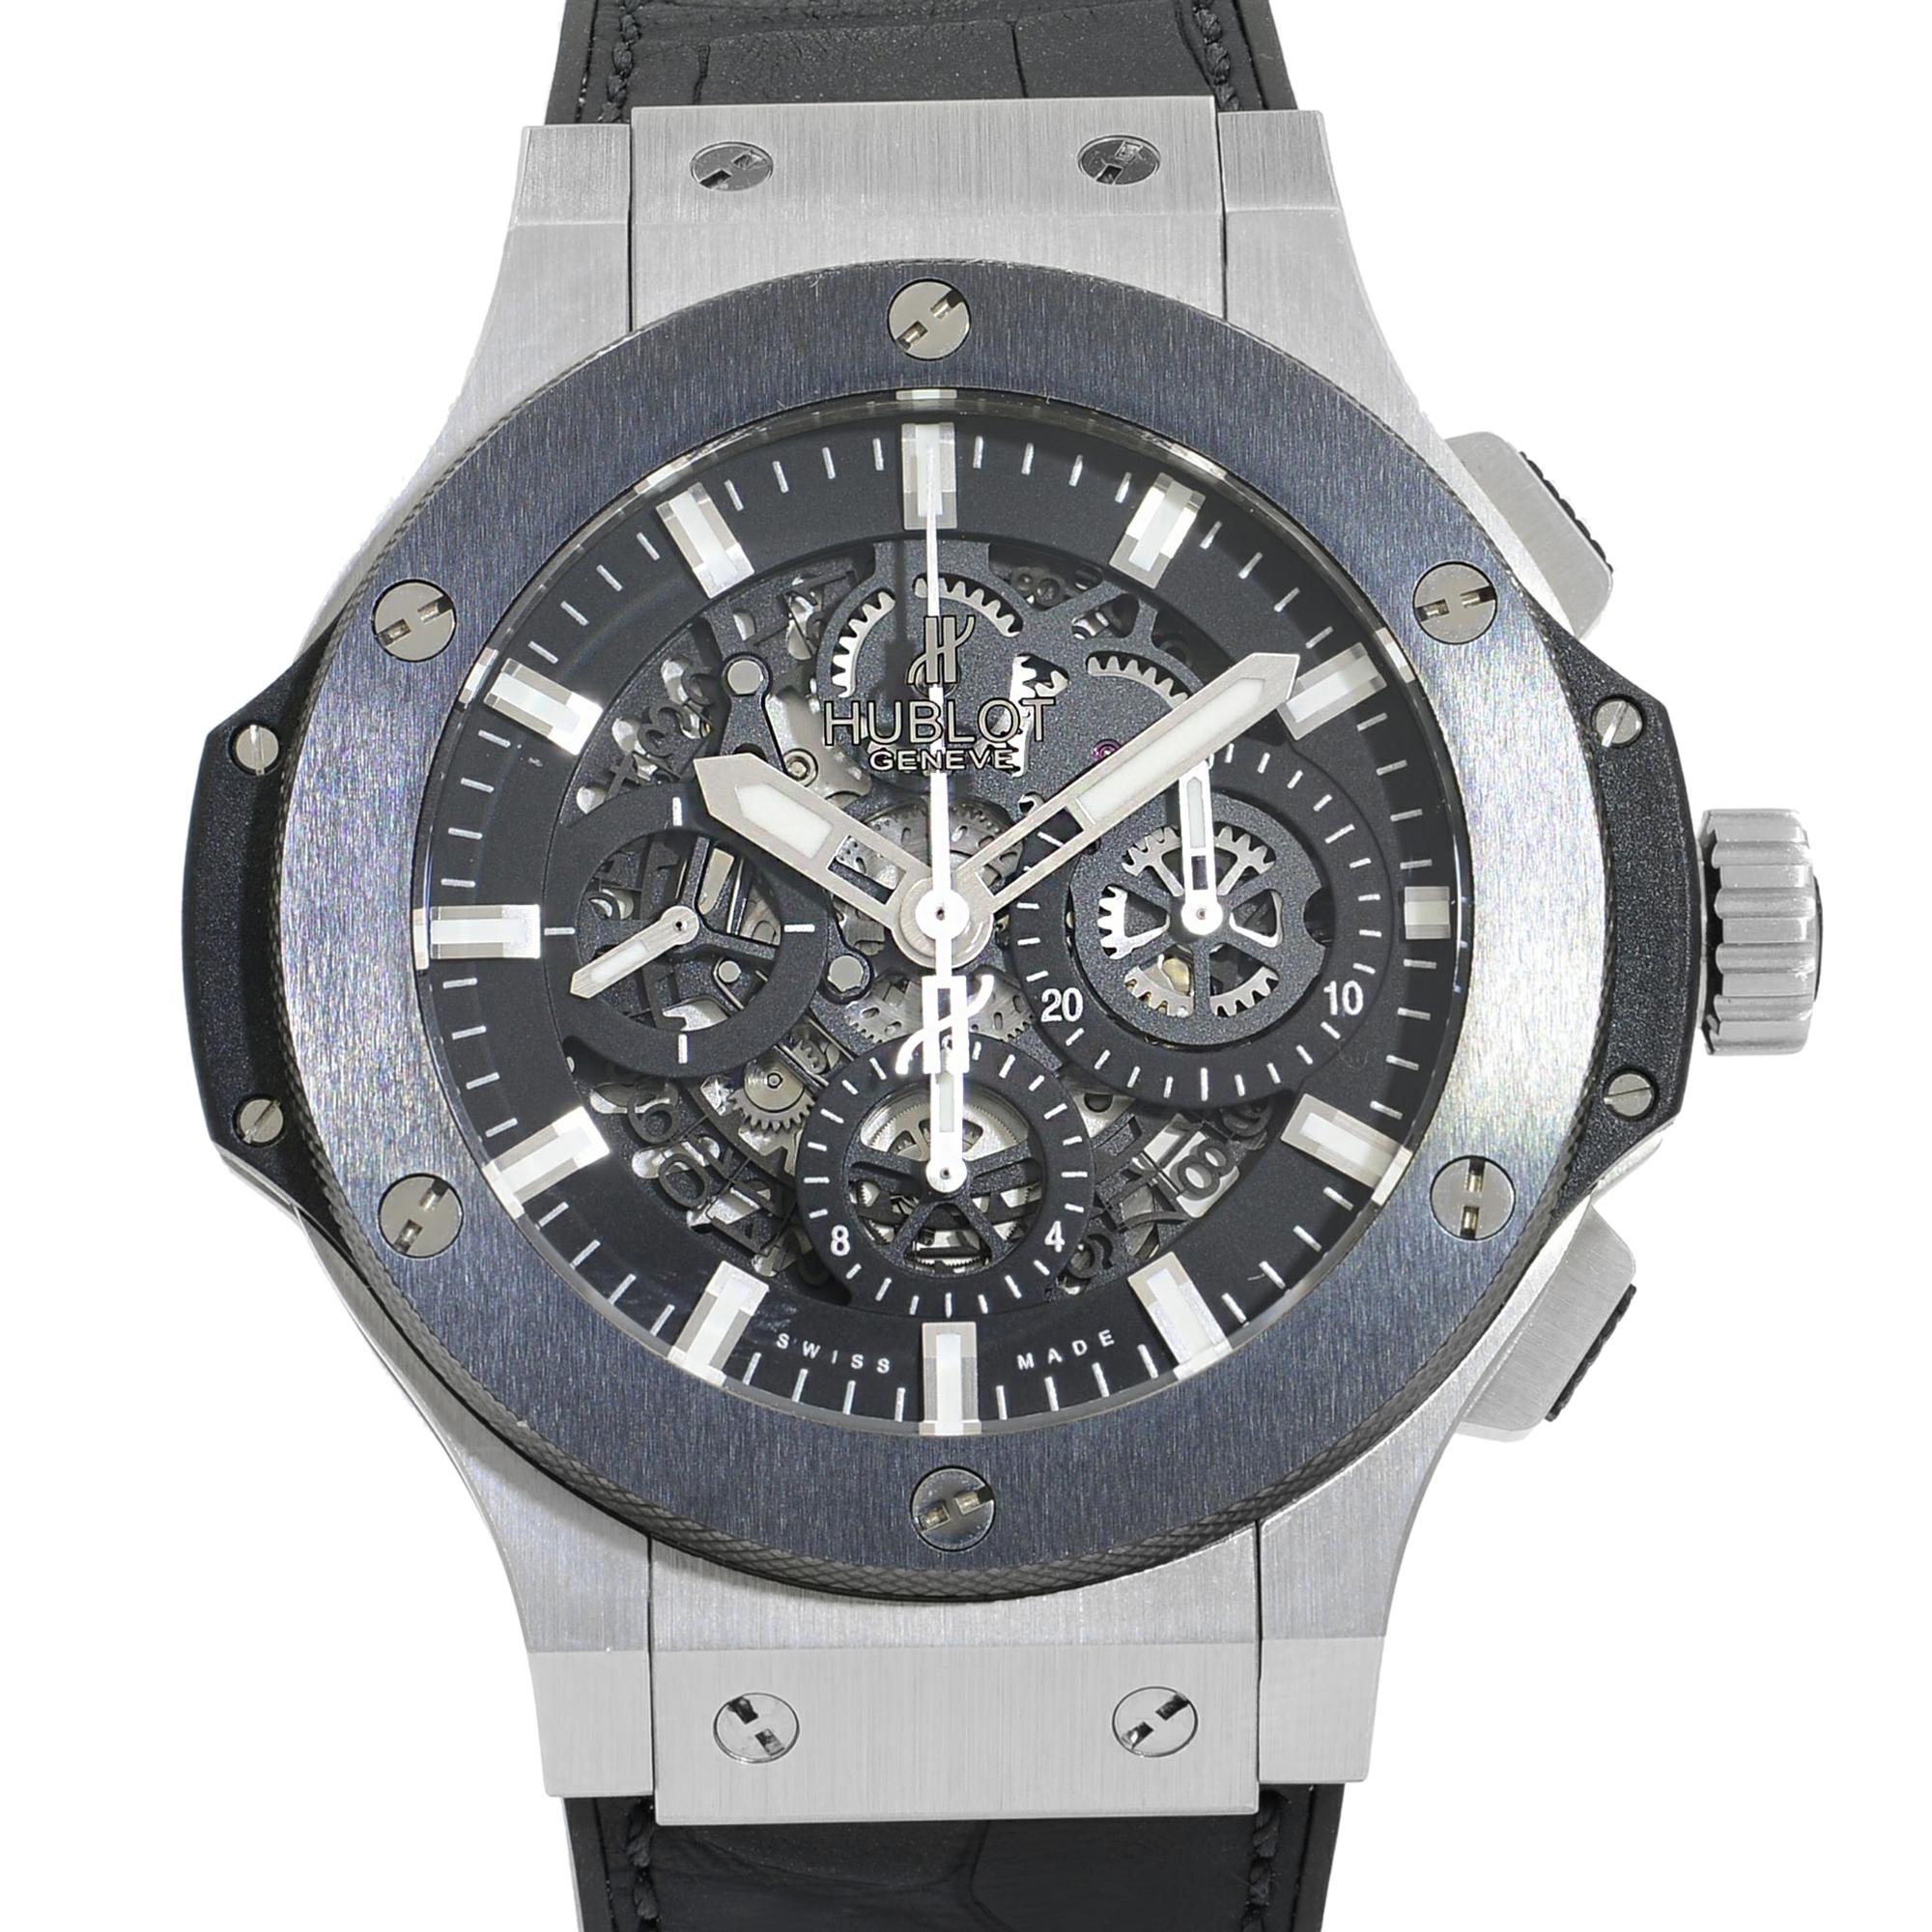 This New Without Tags Hublot Big Bang 311.SM.1170.GR is a beautiful men's timepiece that is powered by an automatic movement which is cased in a stainless steel case. It has a round shape face, chronograph, date, small seconds subdial dial and has